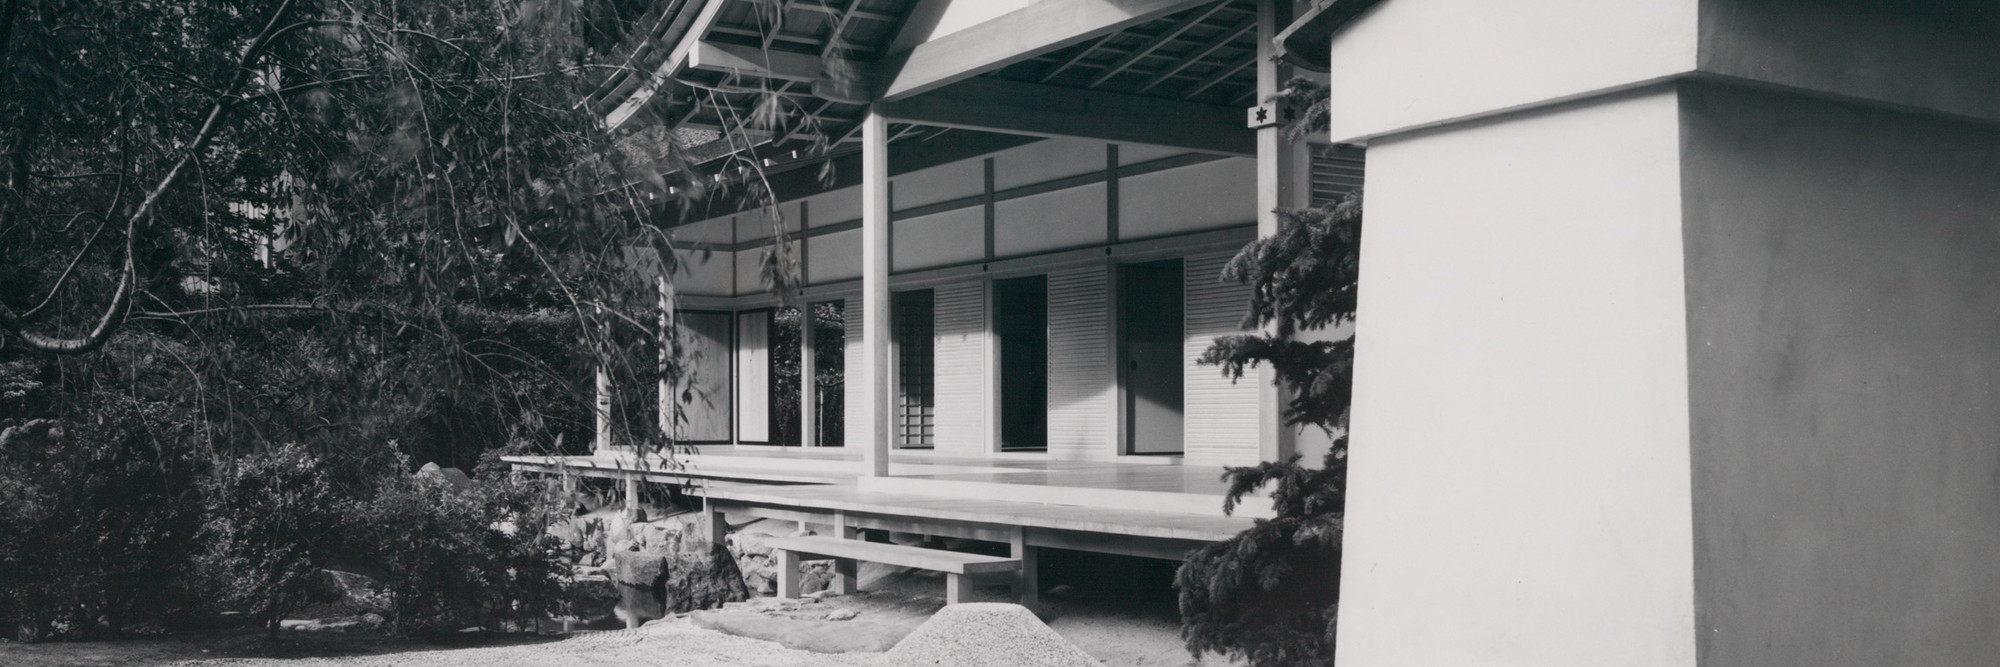 Installation view of Japanese Exhibition House at The Museum of Modern Art, New York